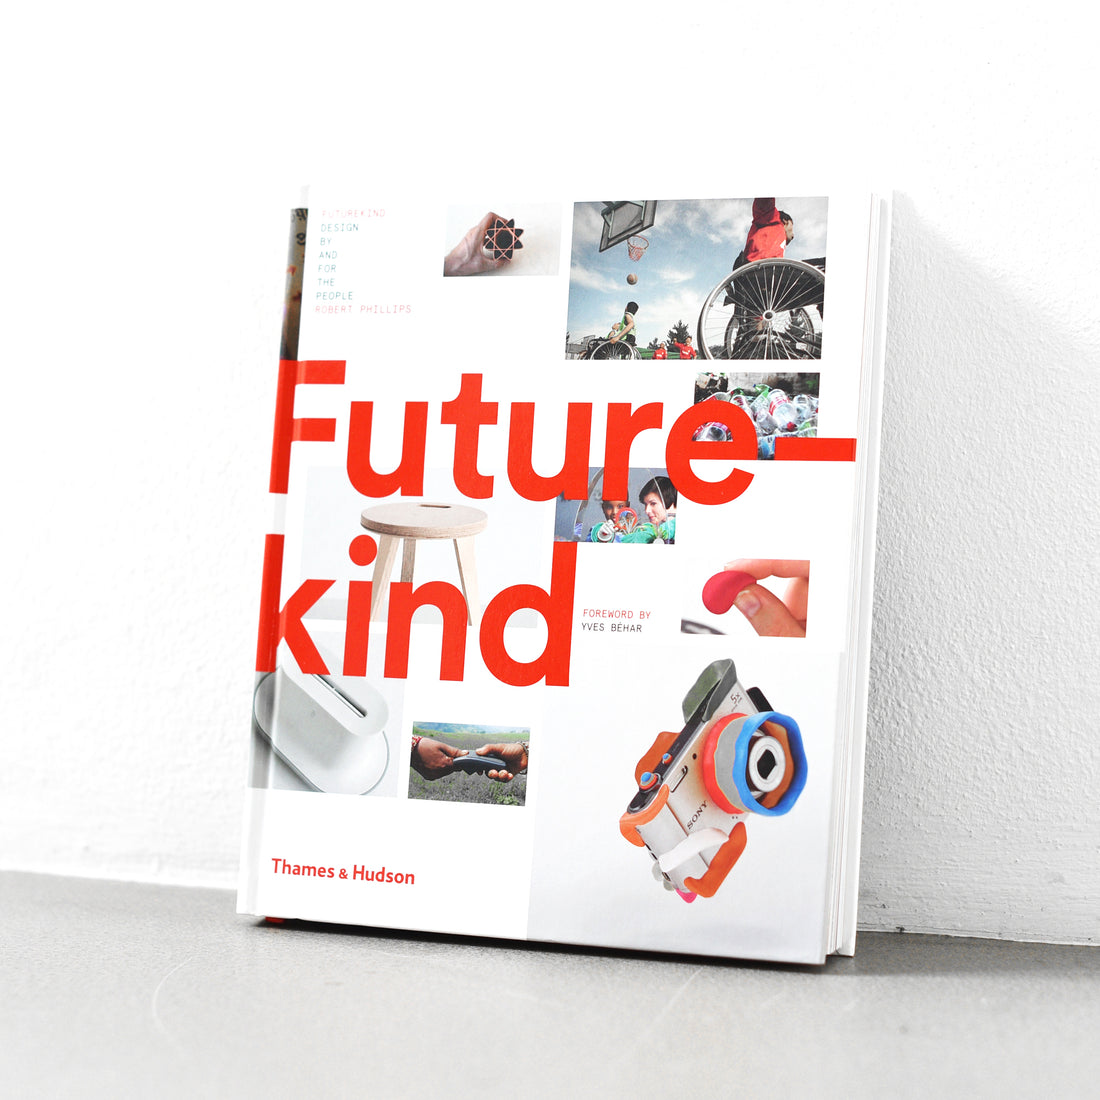 Future-kind: Design by and for the People